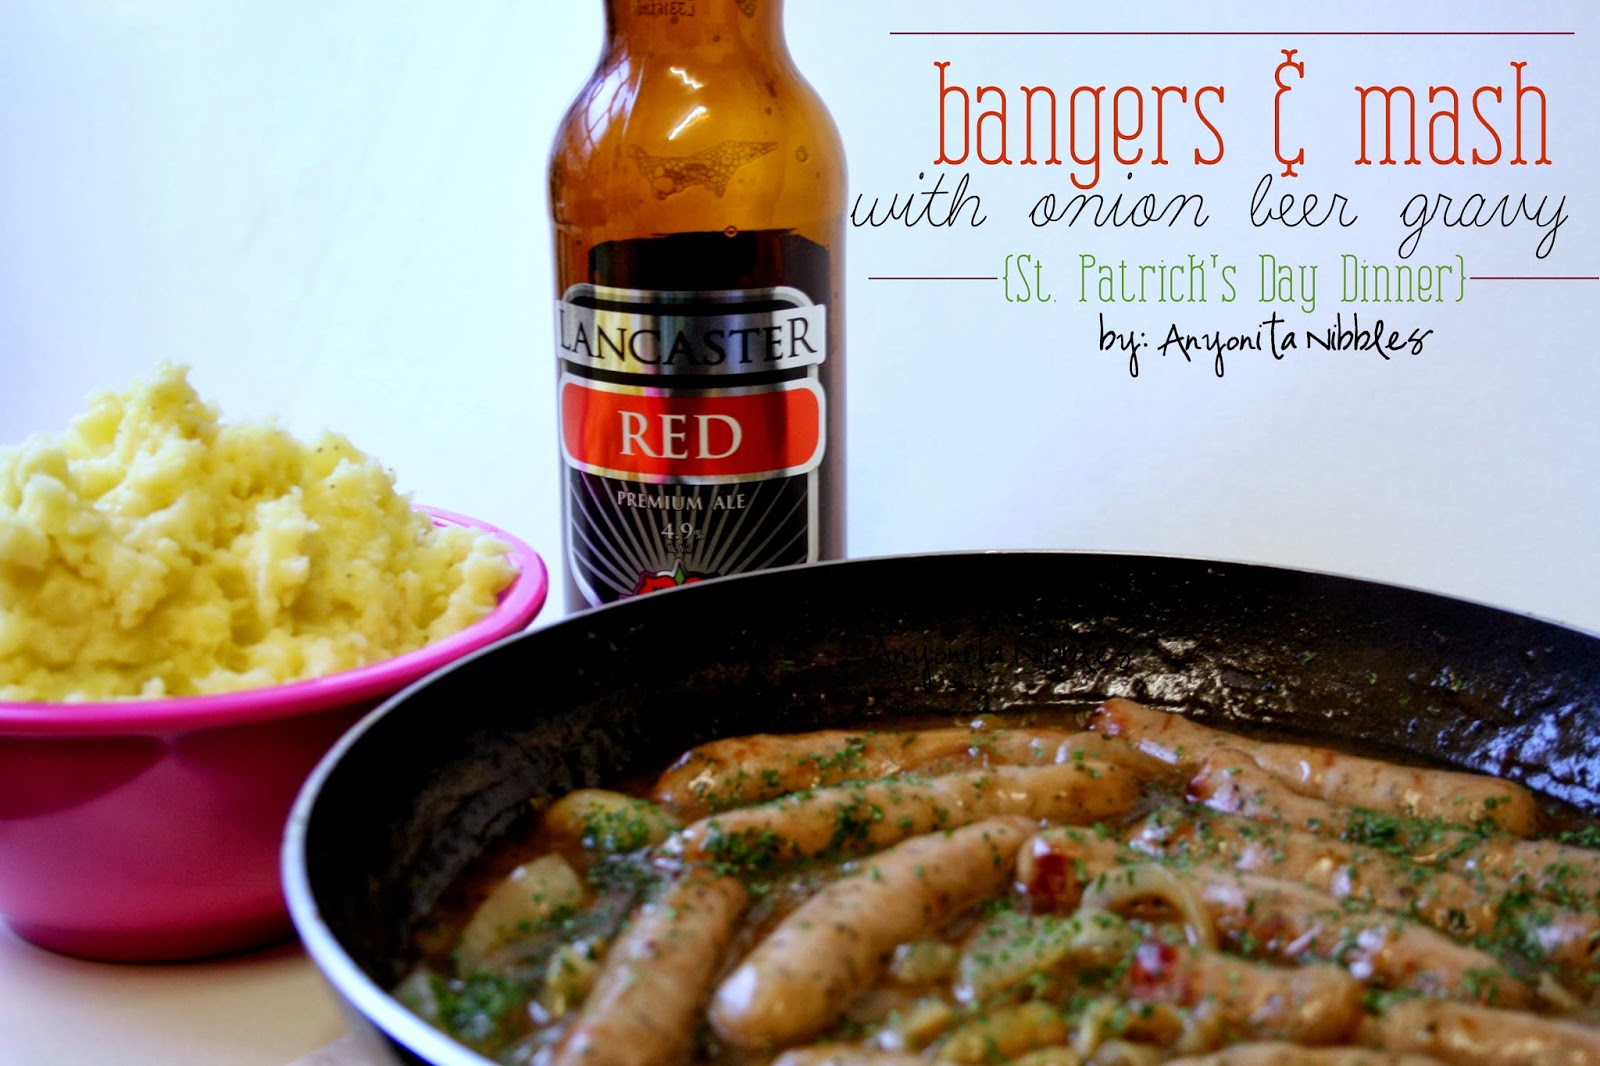 Bangers & Mash with Onion Beer Gravy | Easy and authentic #StPatricksDay #Dinner from Anyonita Nibbles